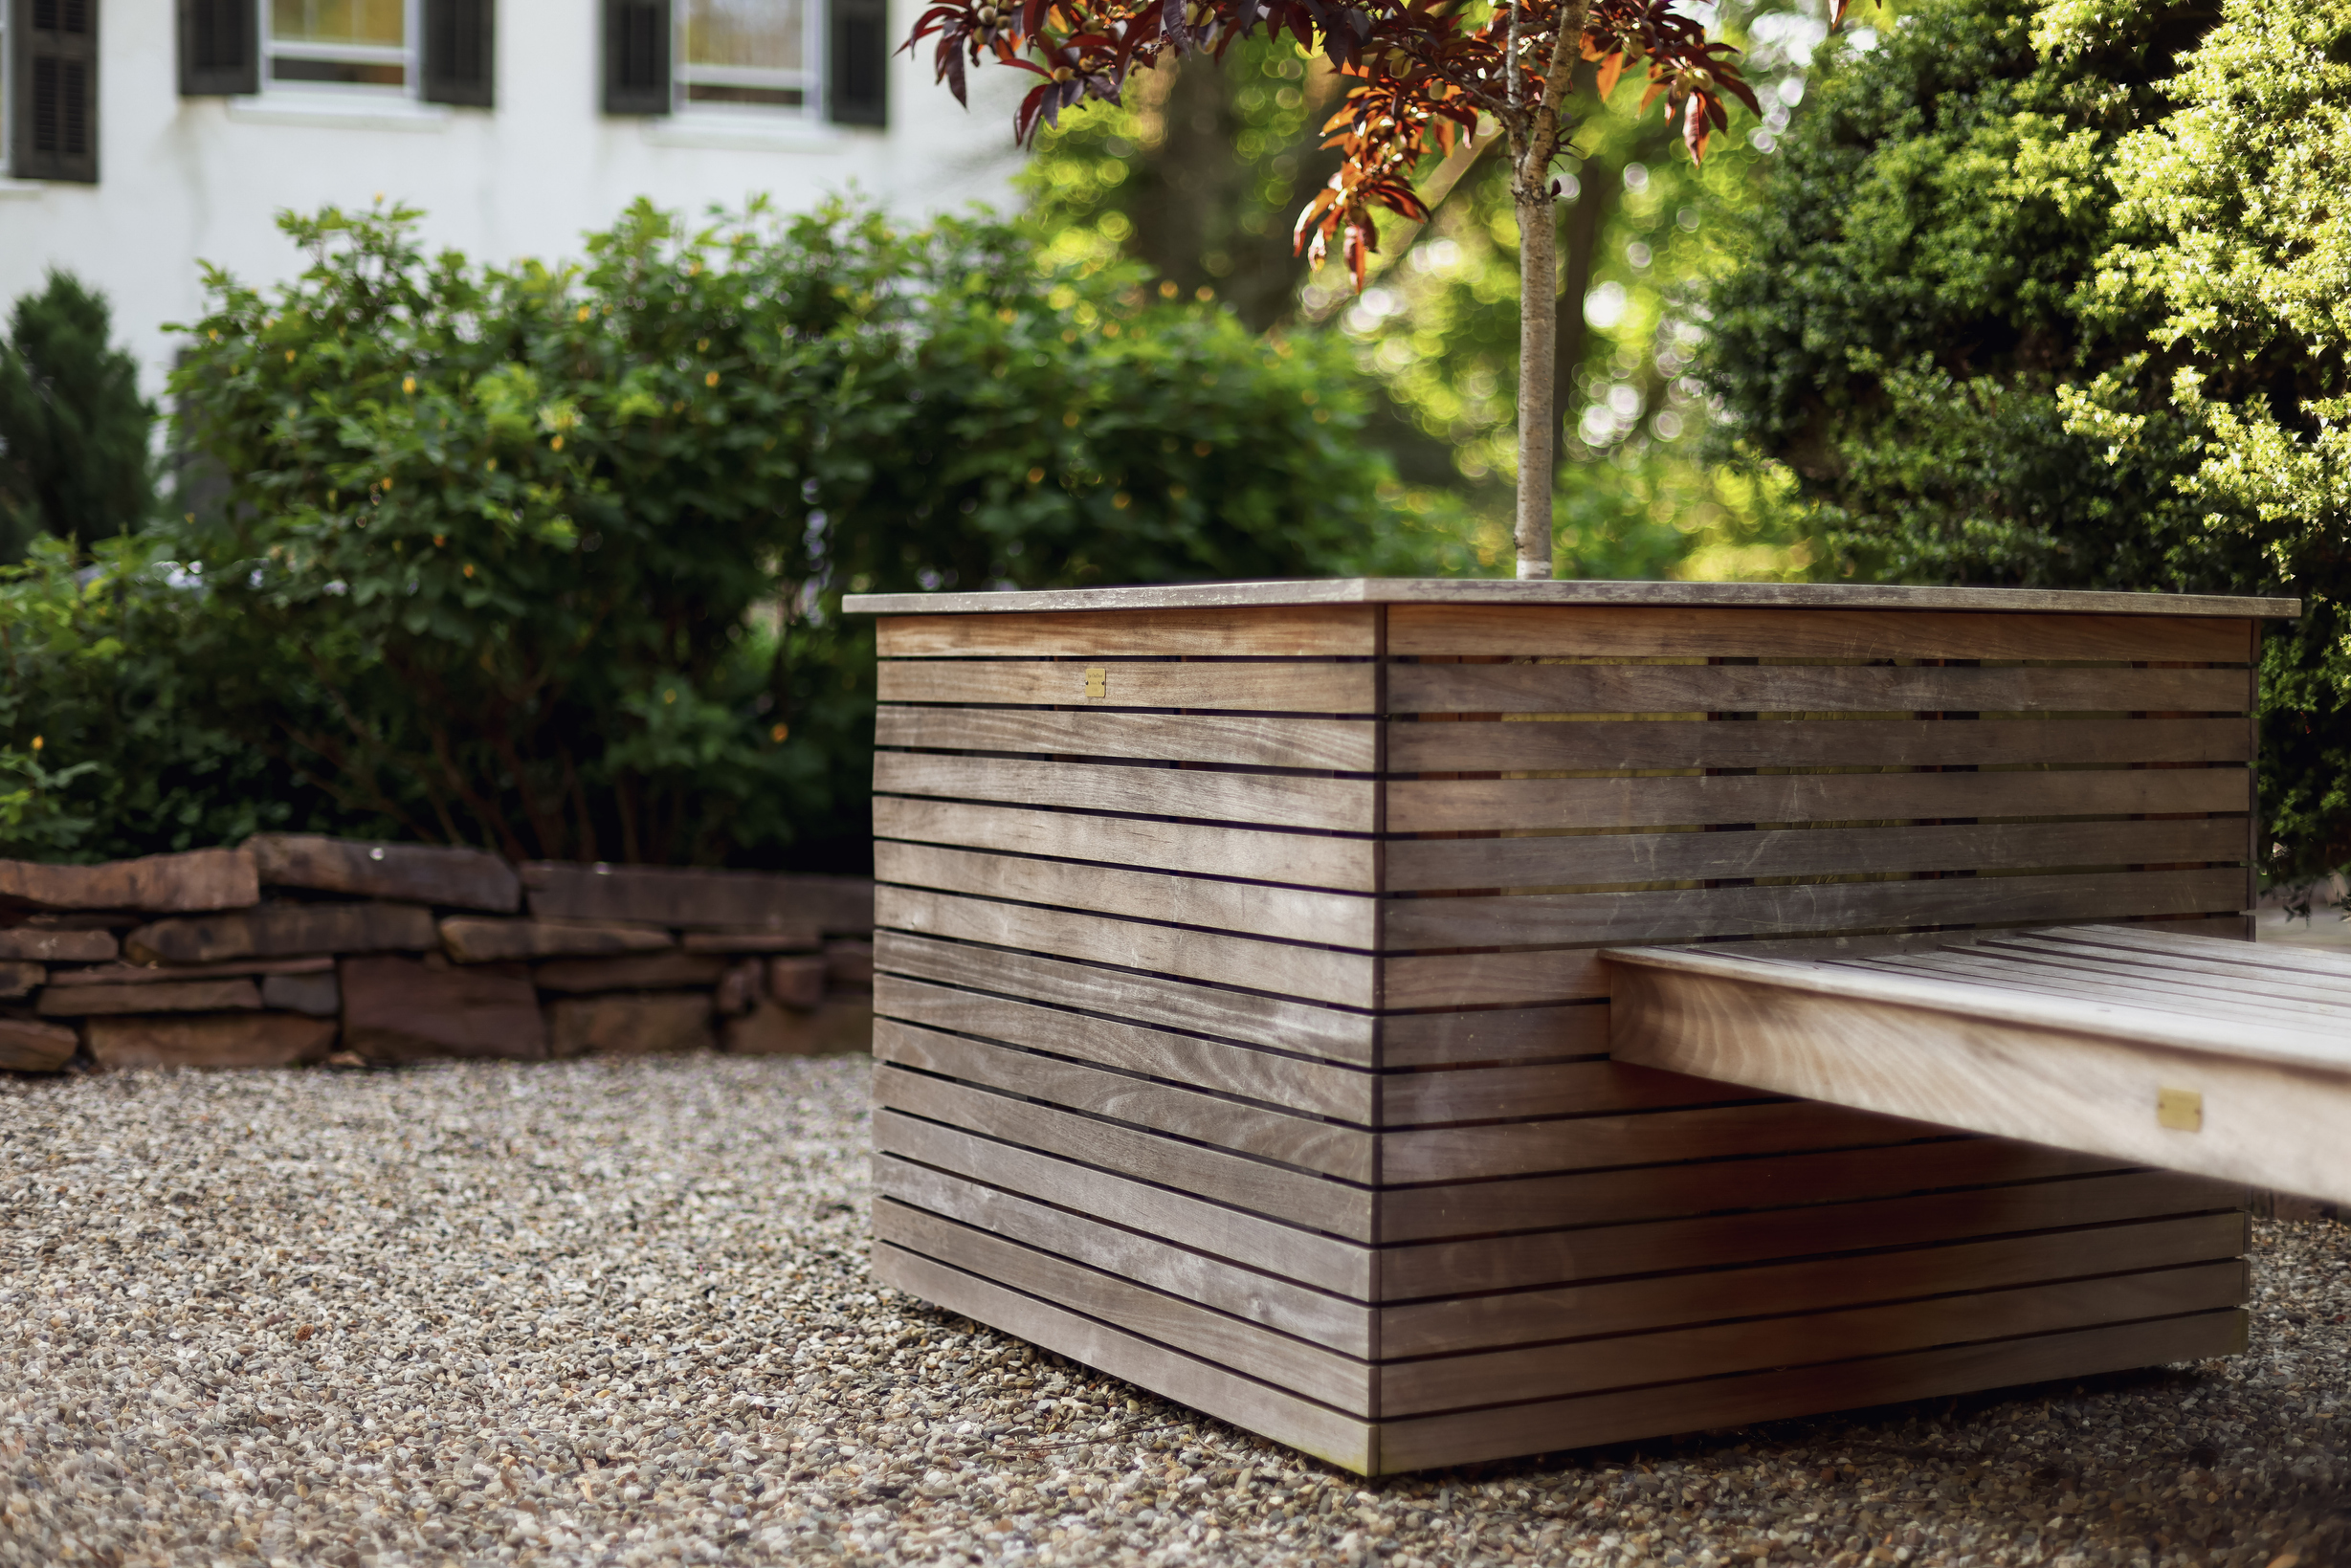 wooden square planter with green flower coming out, bench next to it